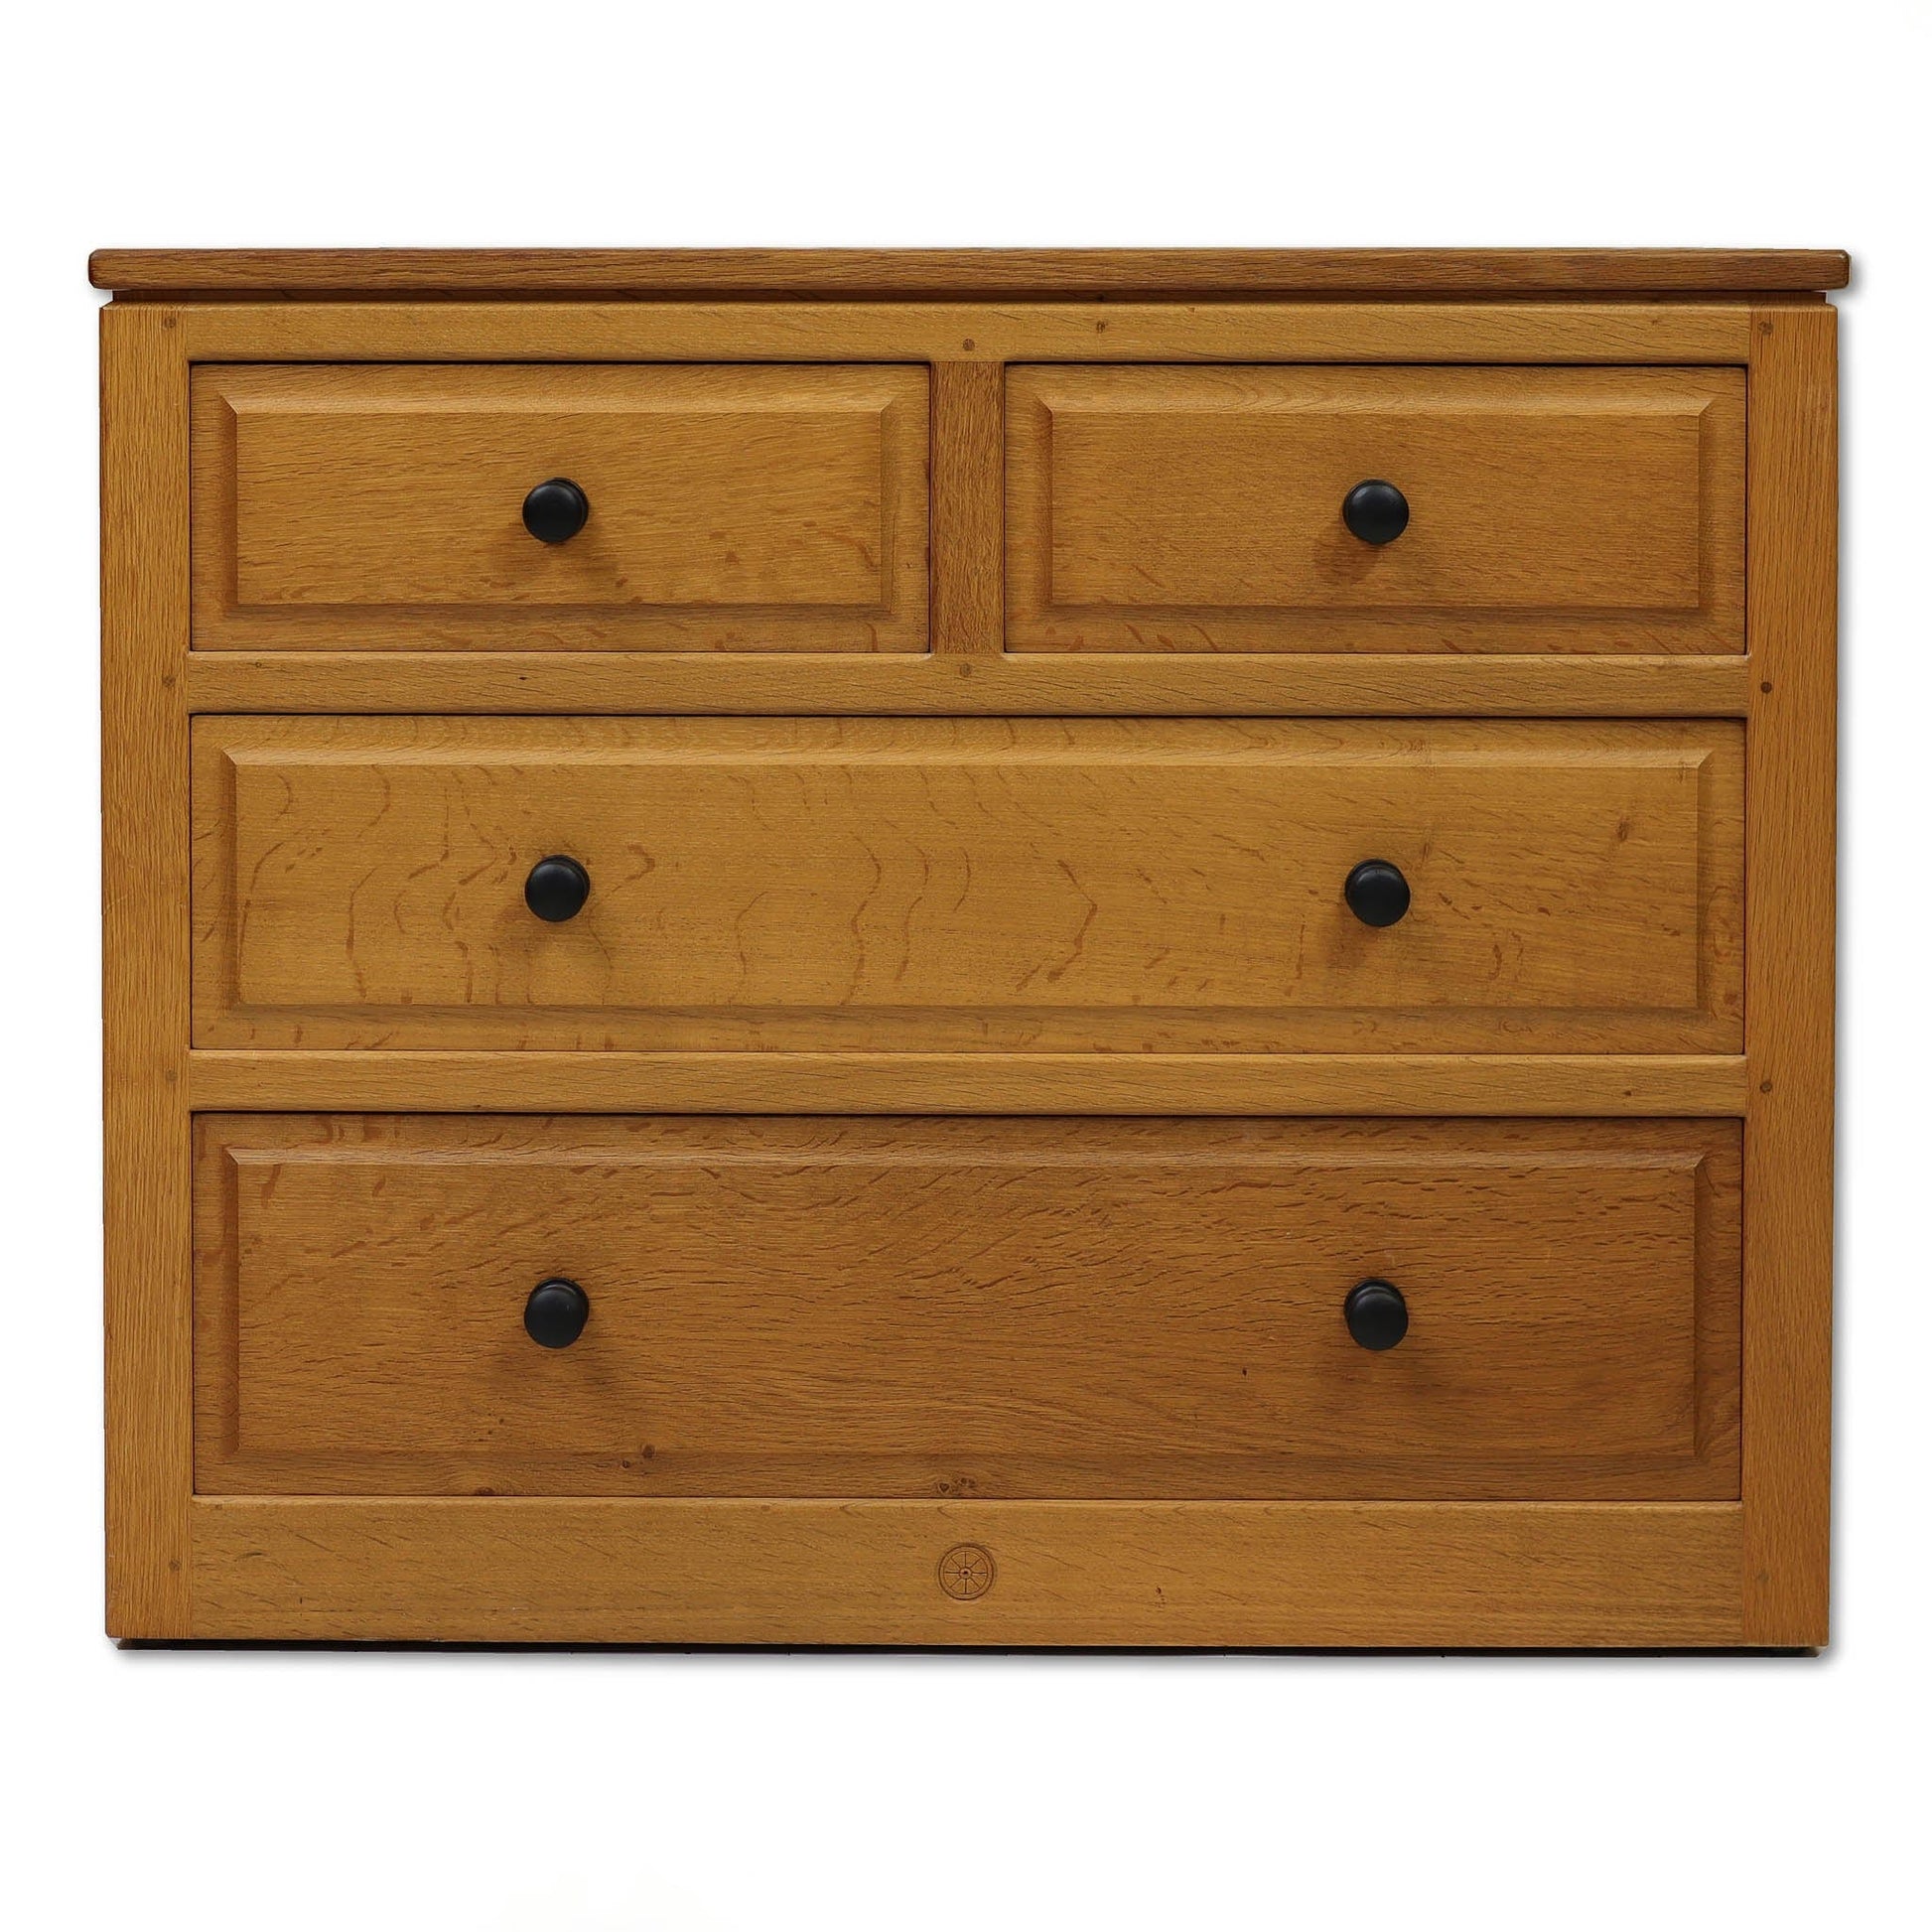 Phil Langstaff Arts & Crafts Yorkshire School English Oak Chest of Drawers (a)